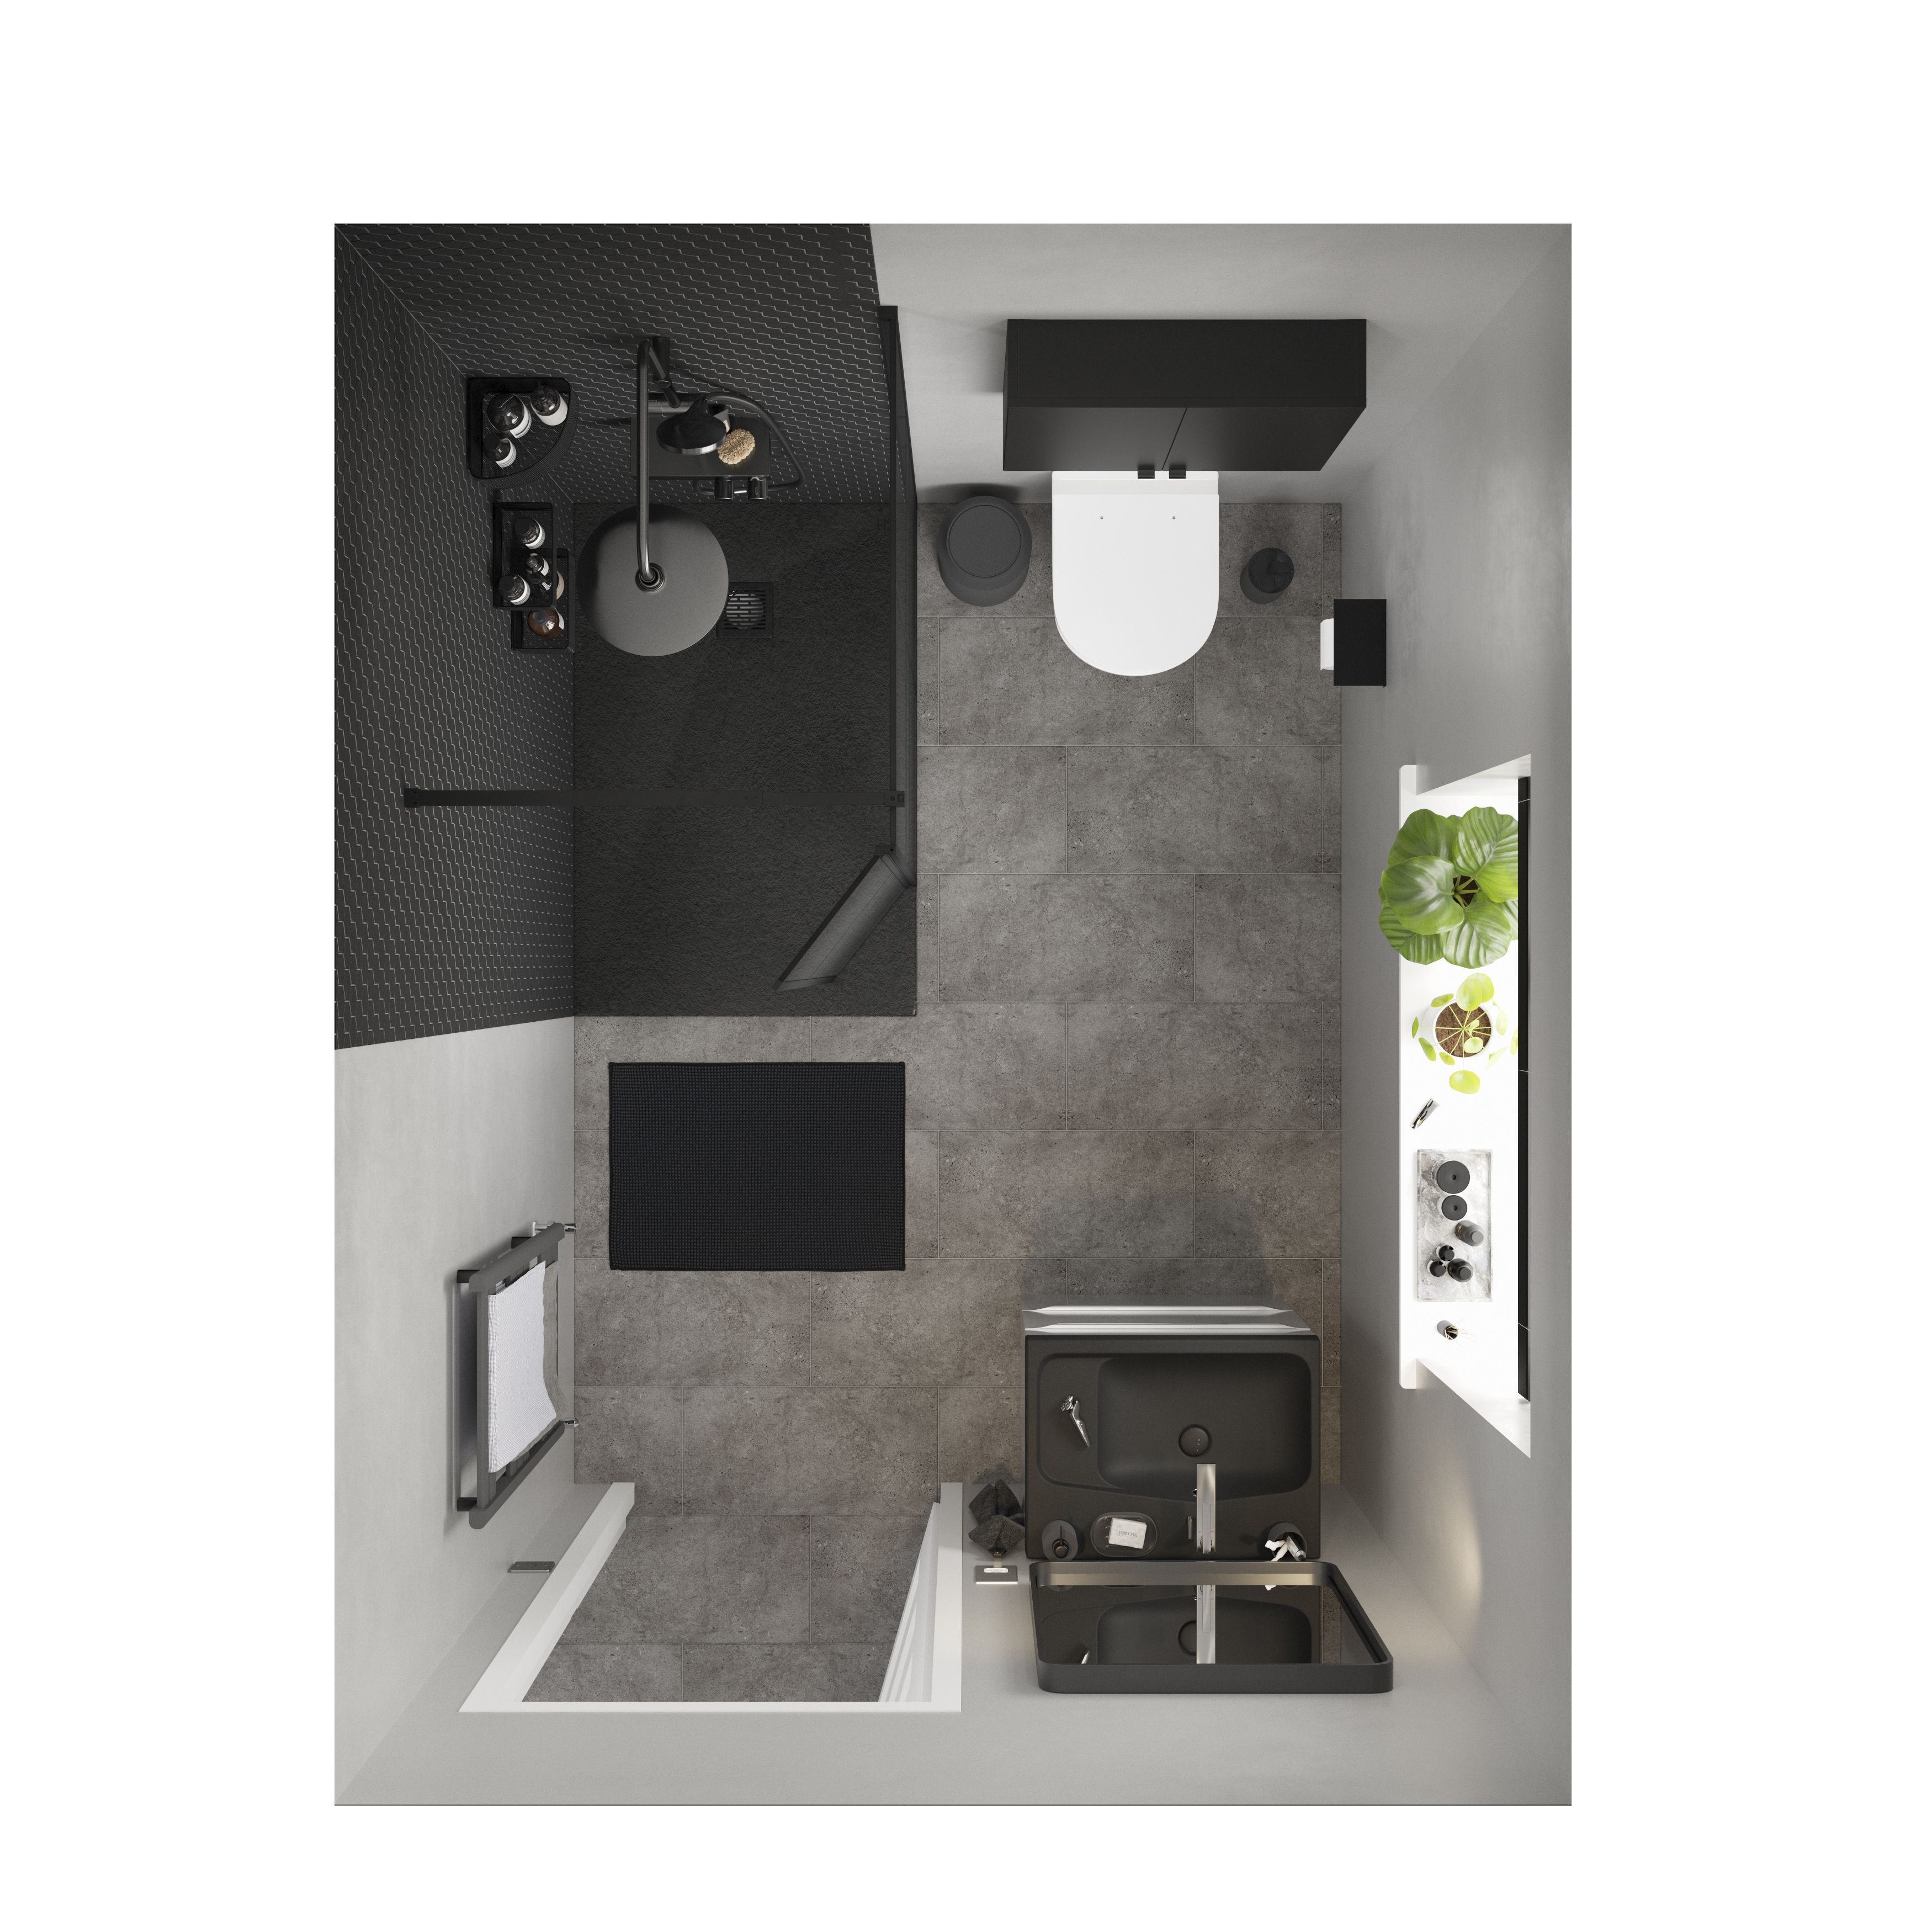 https://kingfisher.scene7.com/is/image/Kingfisher/goodhome-elland-black-stainless-steel-small-1-tier-shower-basket-w-20-2cm~5059340393131_03i?$MOB_PREV$&$width=618&$height=618